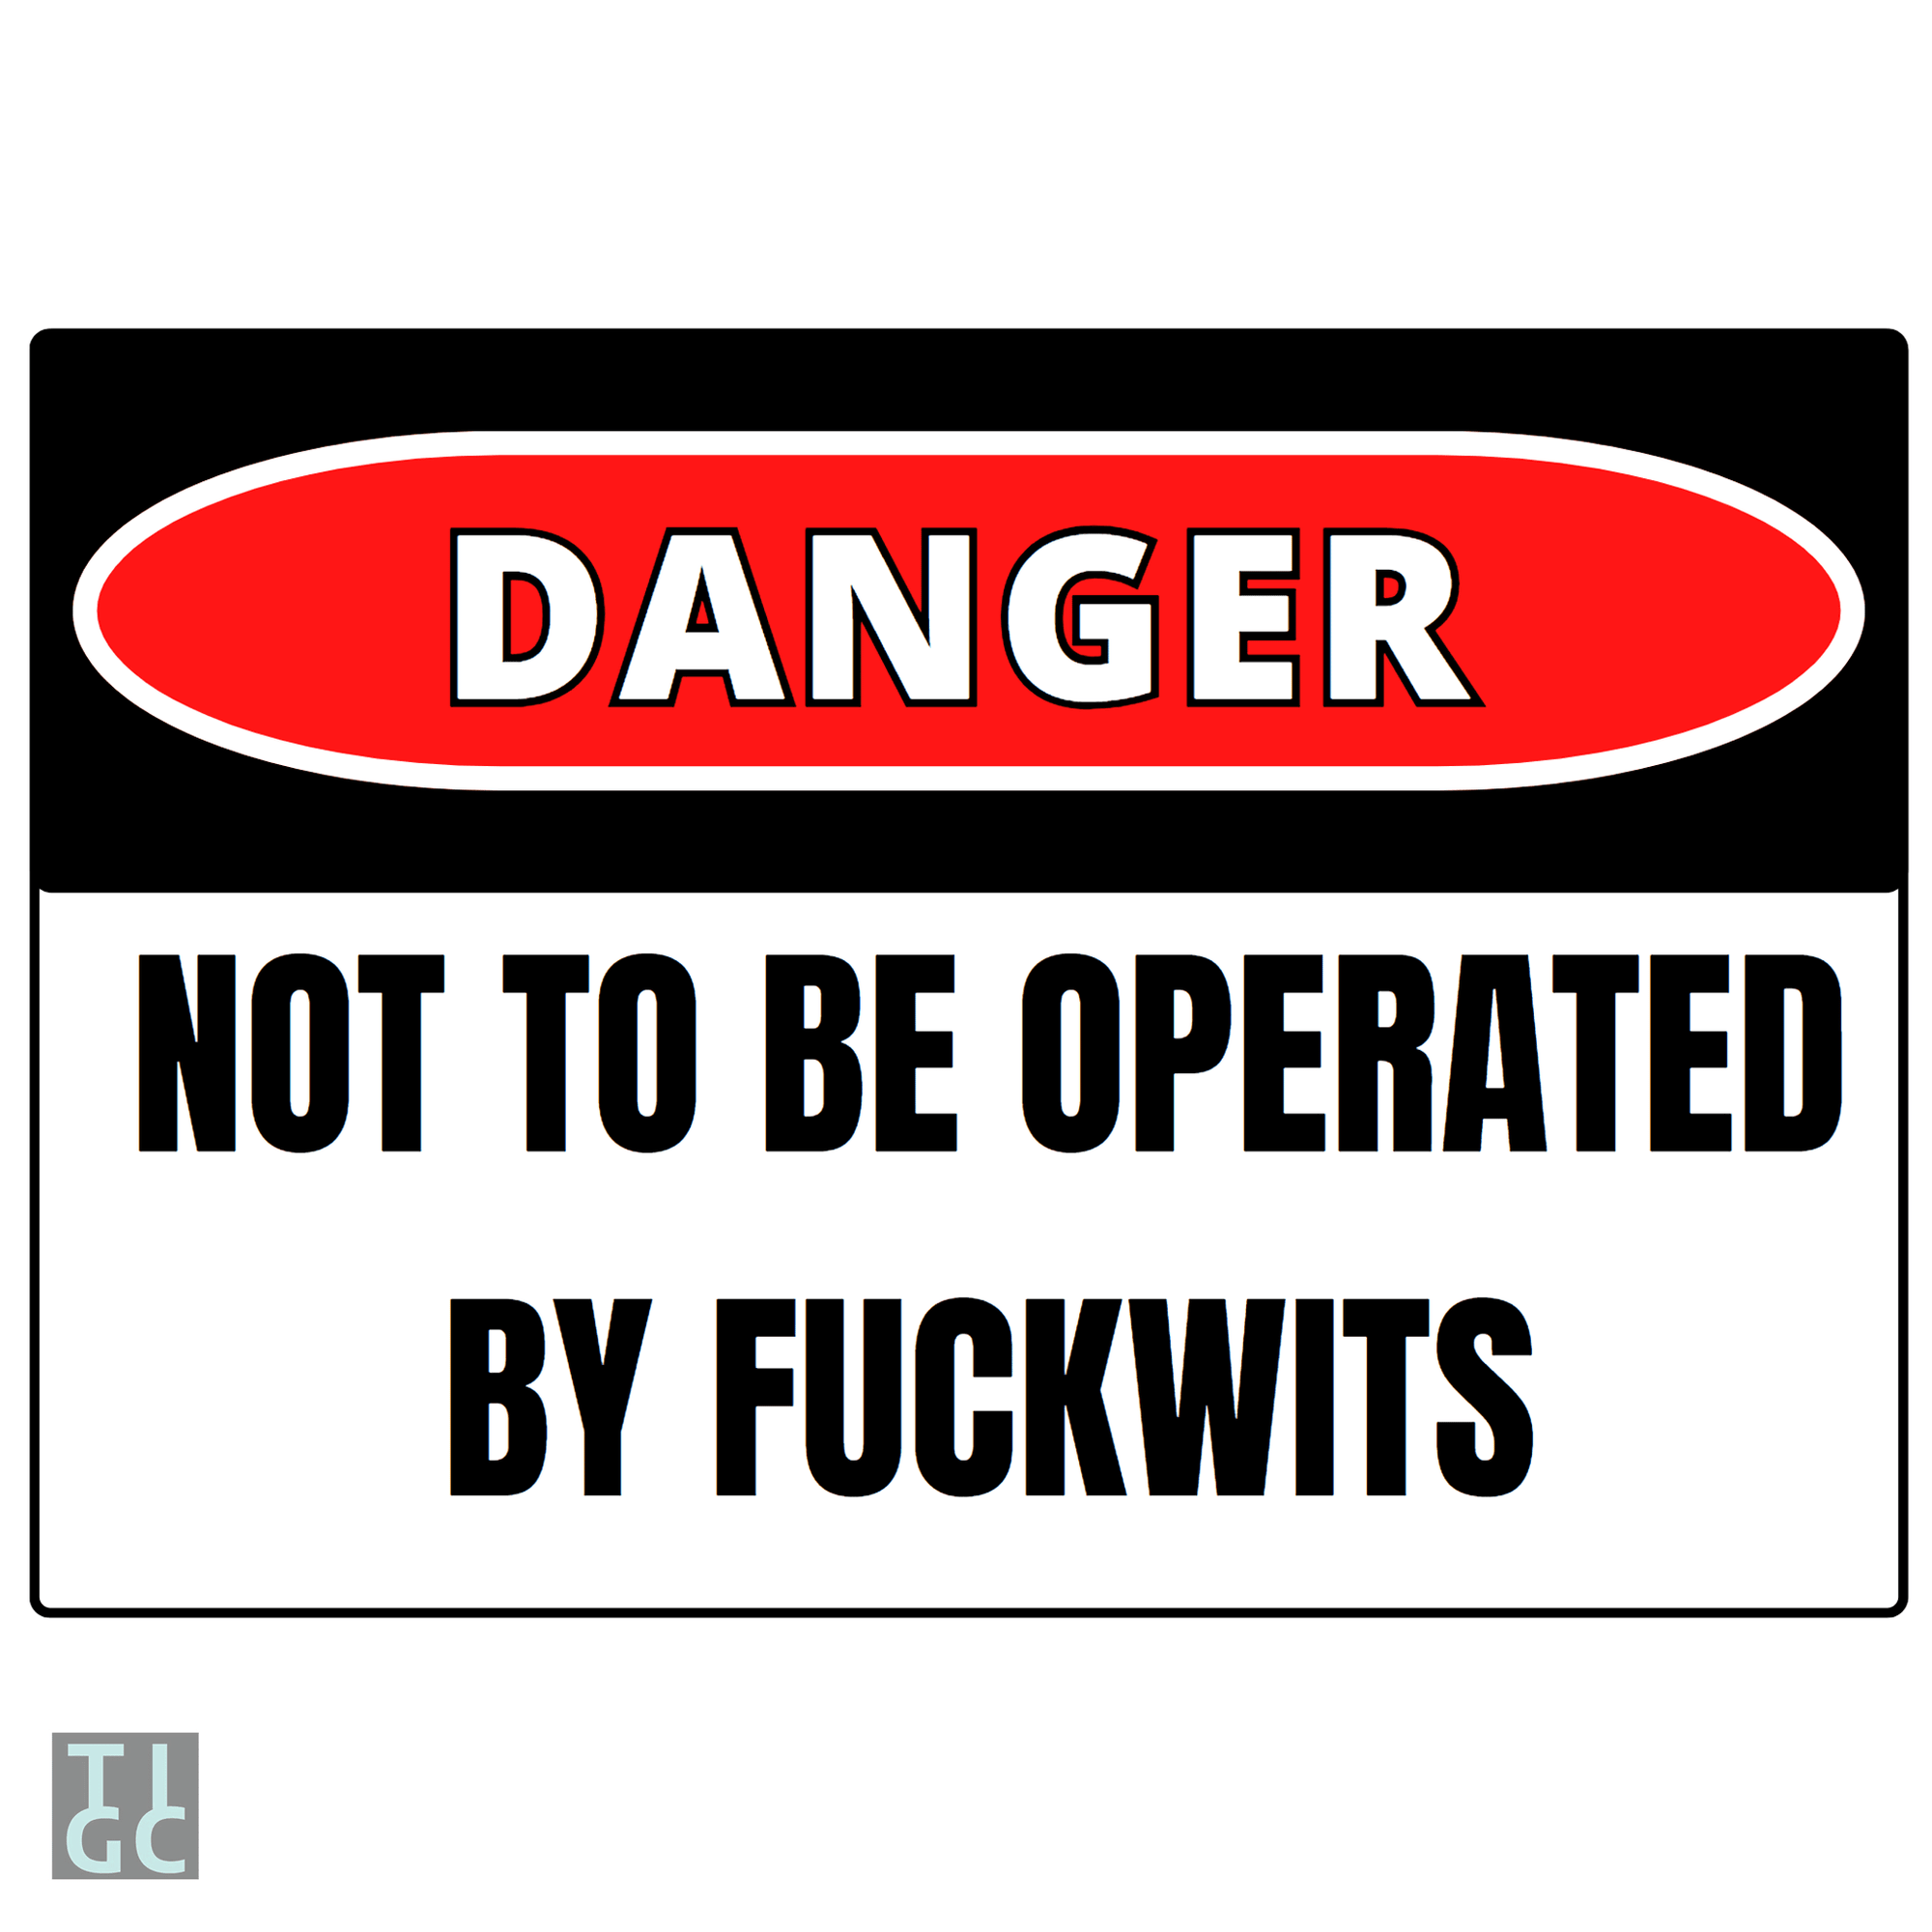 TIGC The Inappropriate Gift Co Danger not to be operated by fuckwits sign (Digital Download Only)